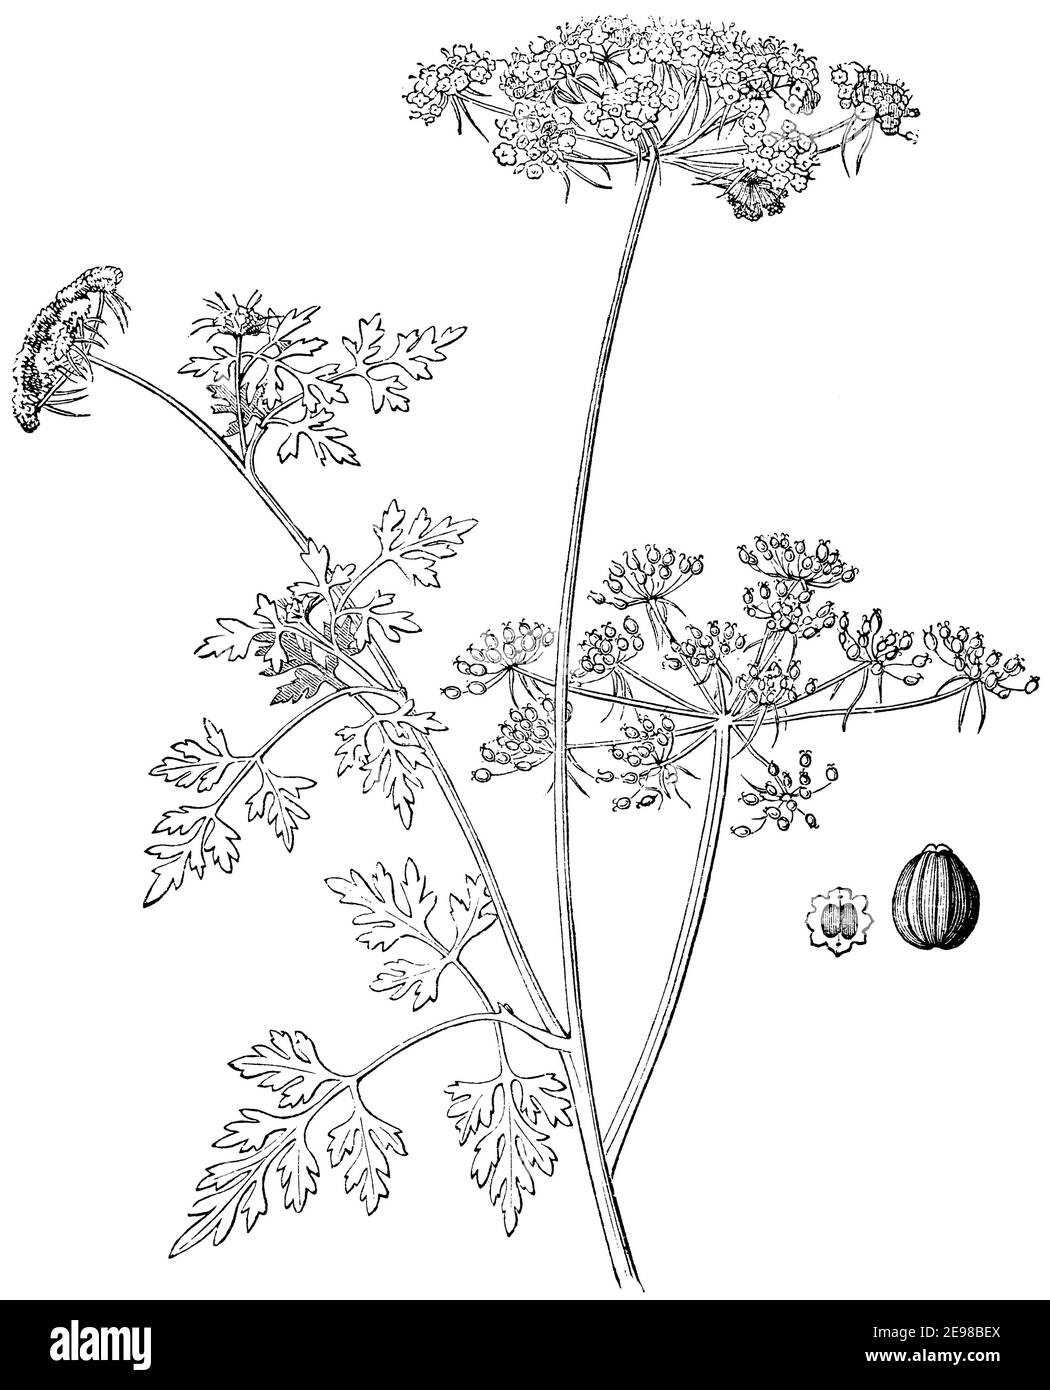 Narr's Petersilie, Narr's cicely, or poison Petersilie / Aethusa cynapium / Hundspetersilie (Botanik Buch, 1875) Stockfoto